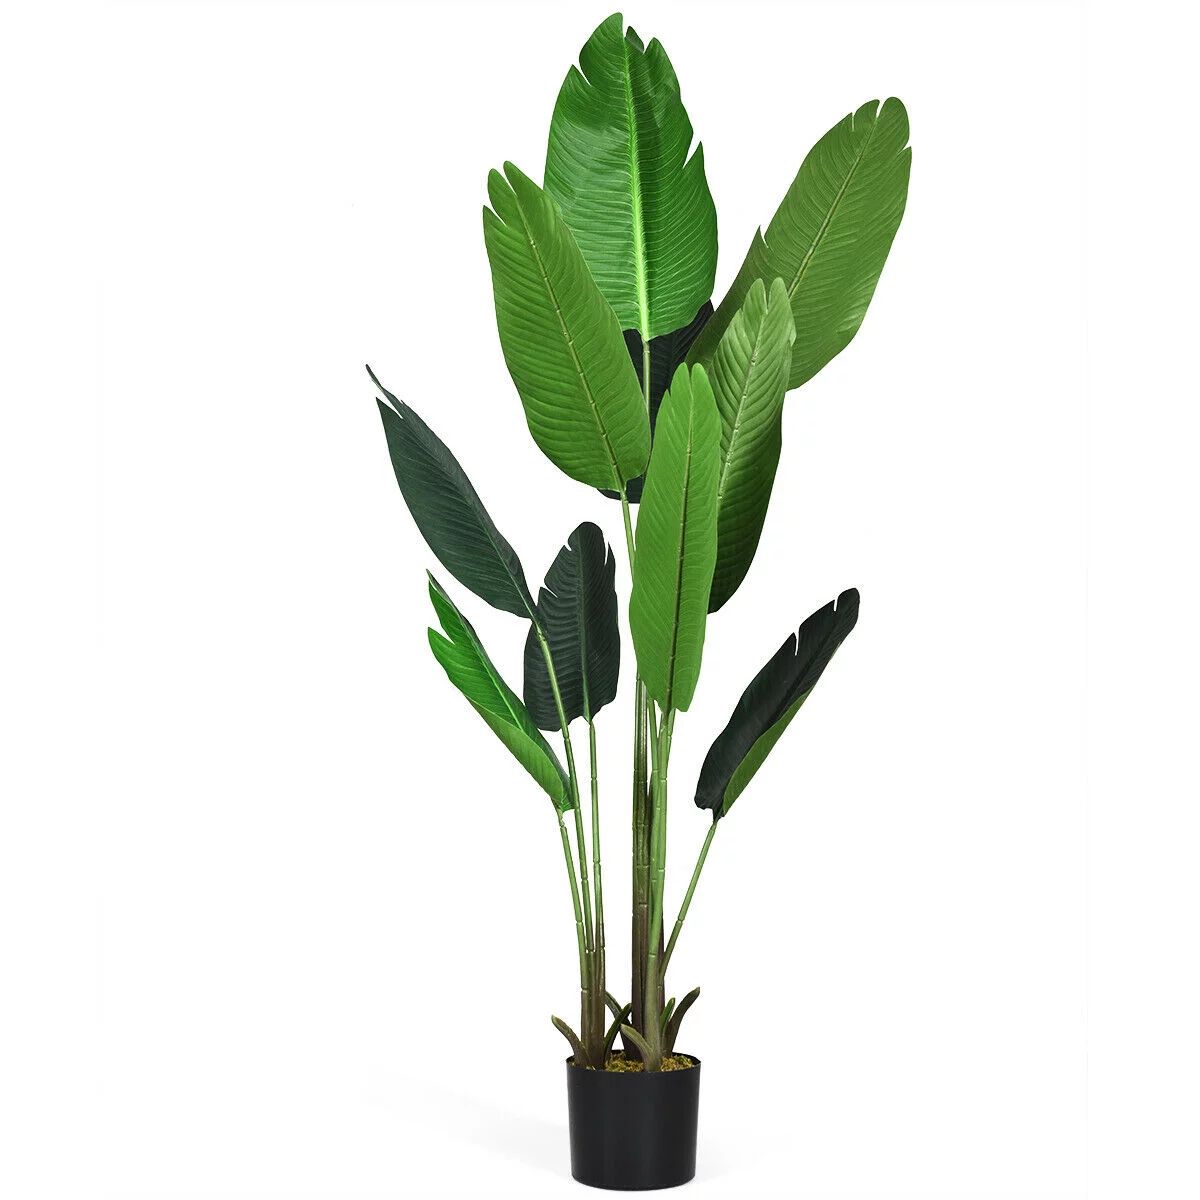 Gymax 5.3ft Artificial Tropical Palm Tree Green Indoor-Outdoor Home Decorative Planter | Walmart (US)